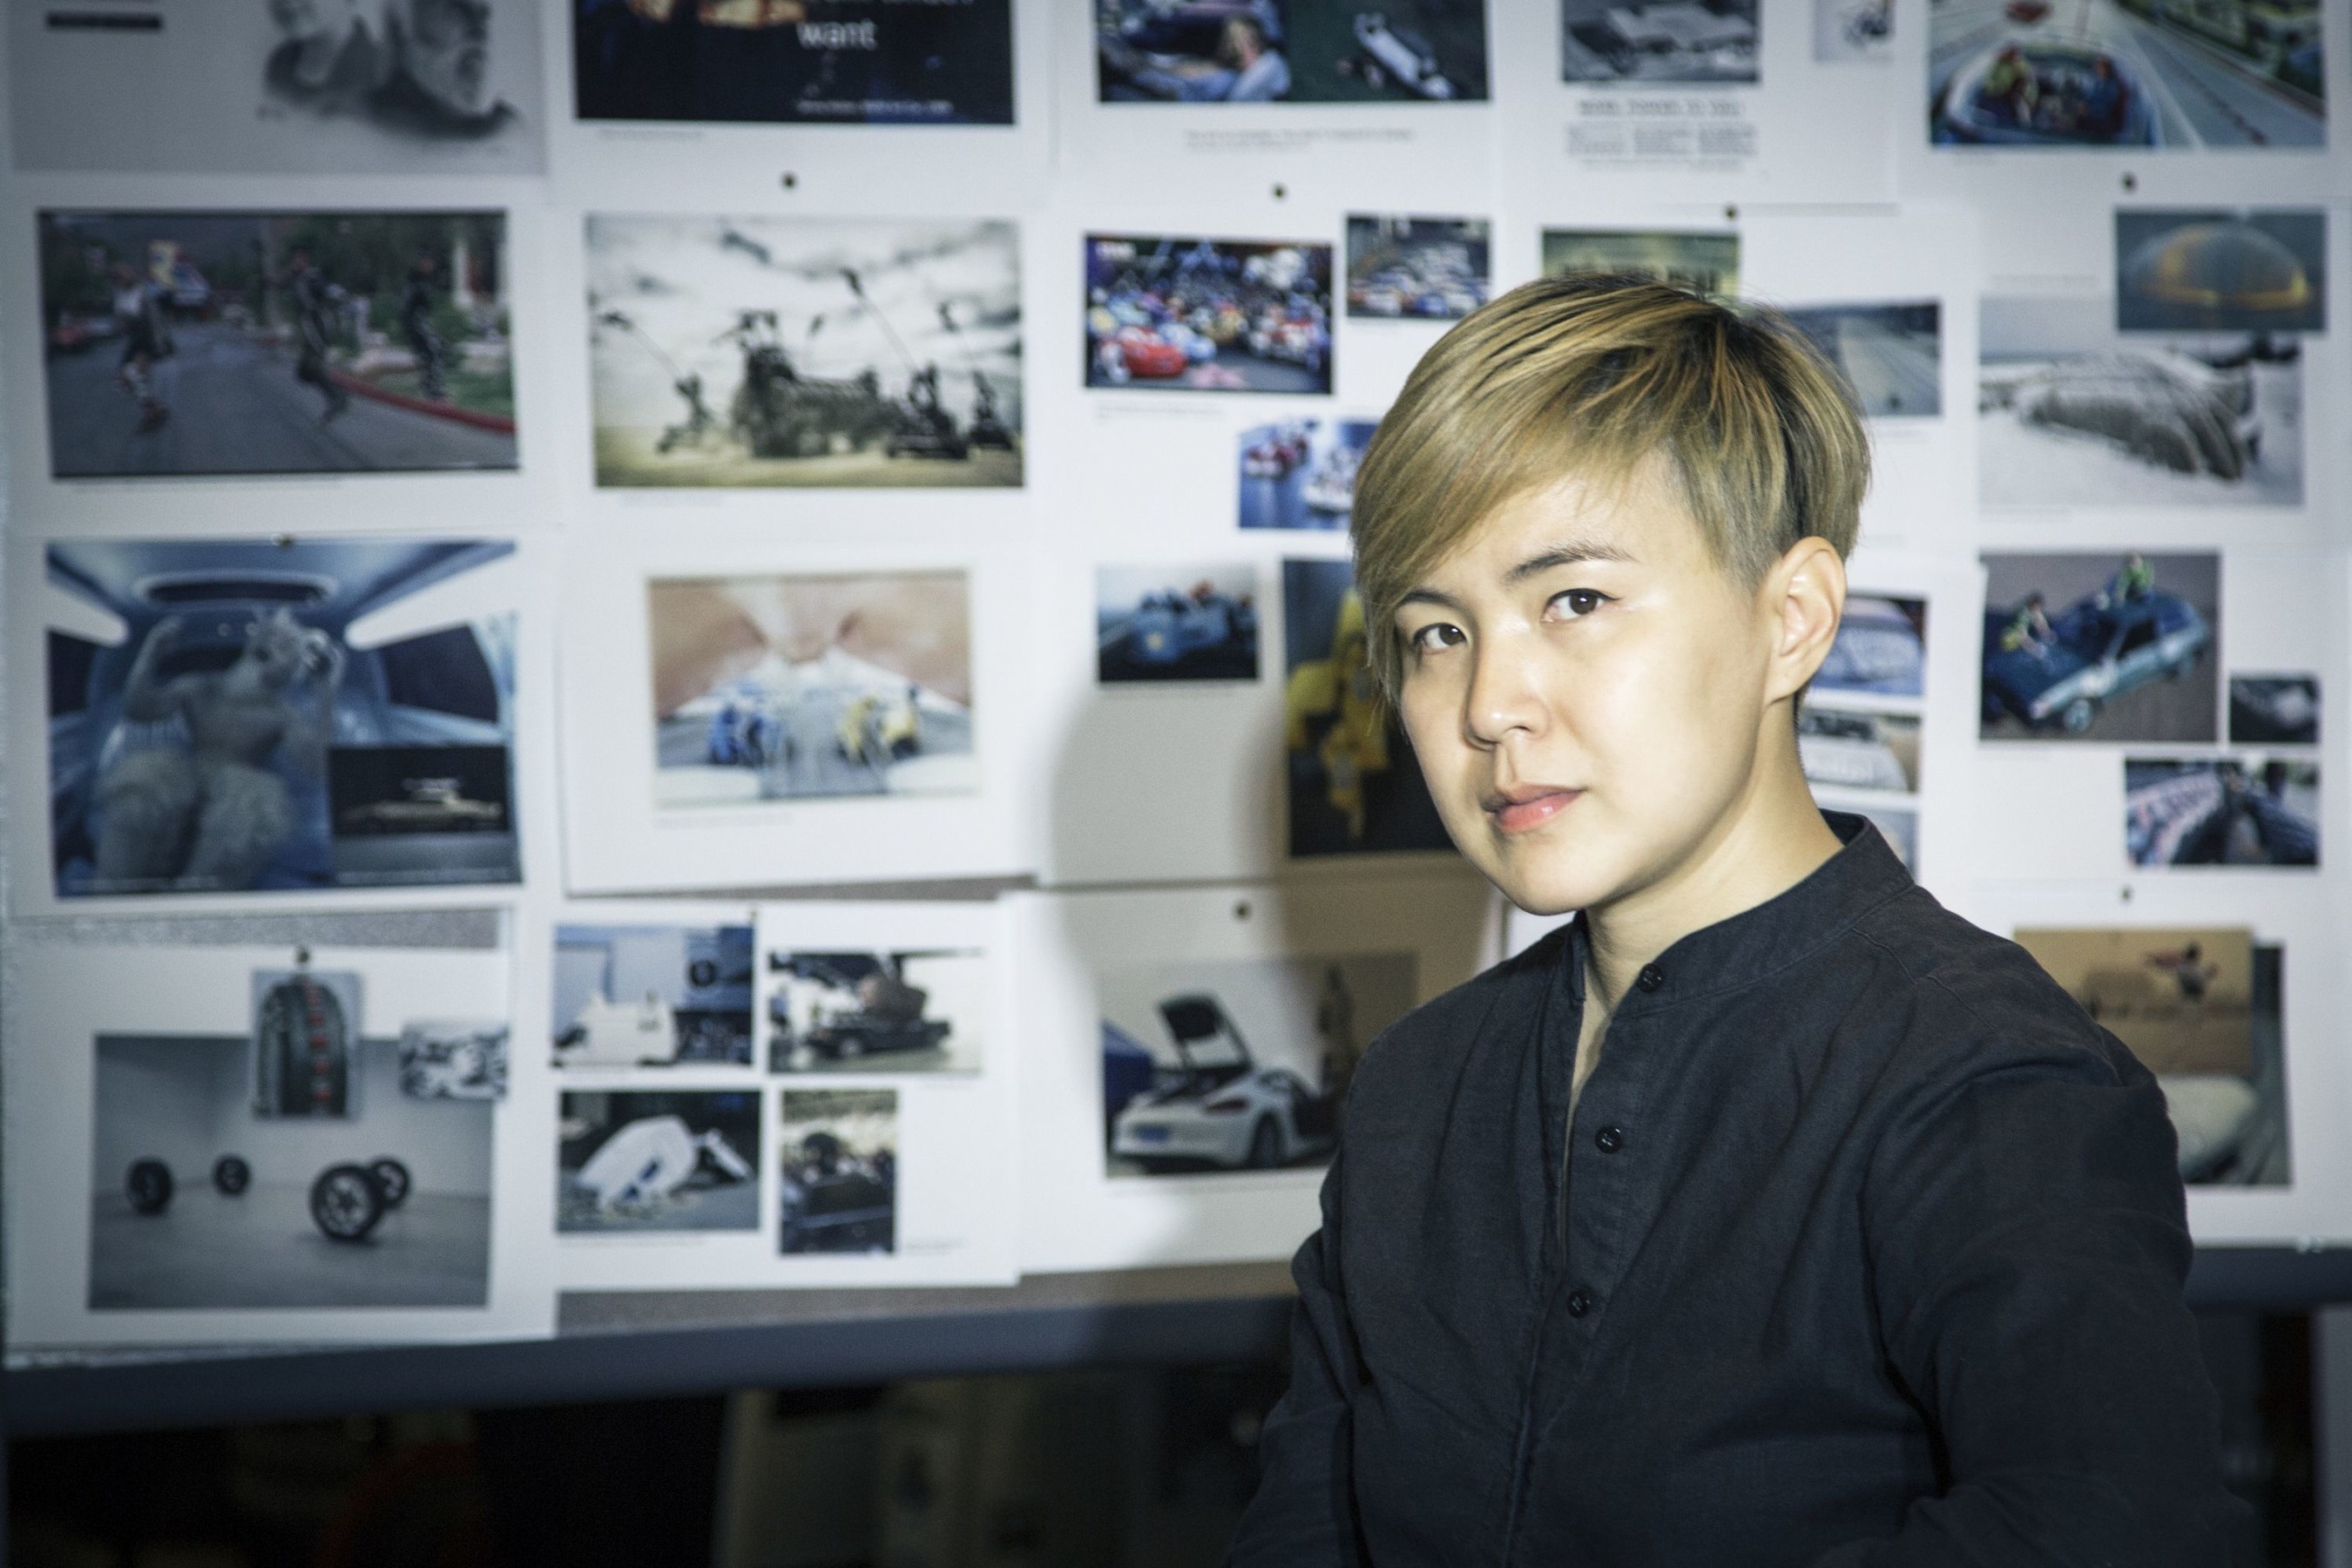 The artist Cao Fei in front of her inspiration wall for the 18th BMW Art Car project (C) The artist, Cao Fei Studio. (PRNewsFoto/BMW Group)